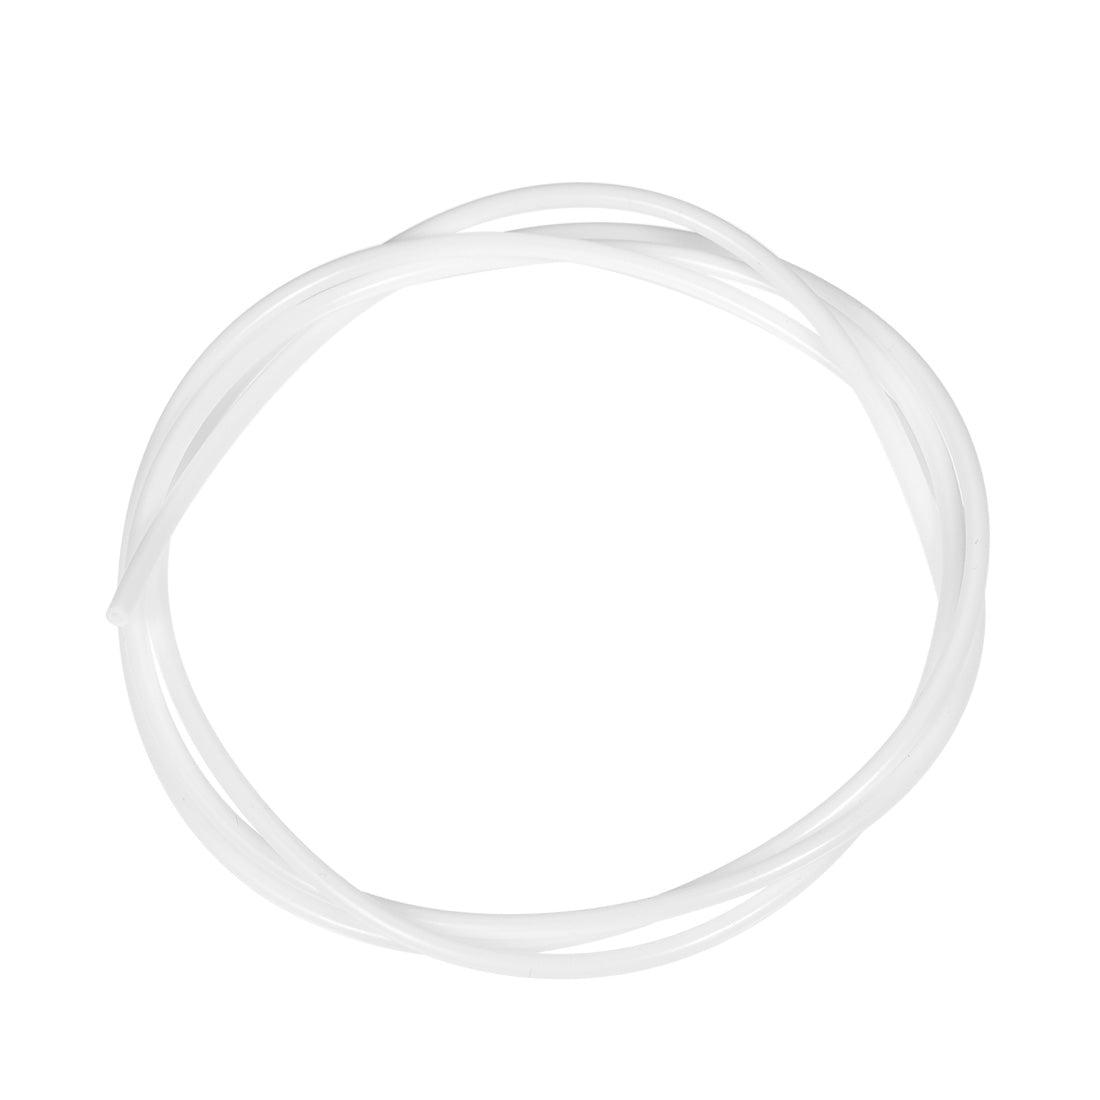 uxcell Uxcell PTFE Tube 4.9Ft - ID 2mm x OD 4mm Fit 1.75 Filament for 3D Printer White